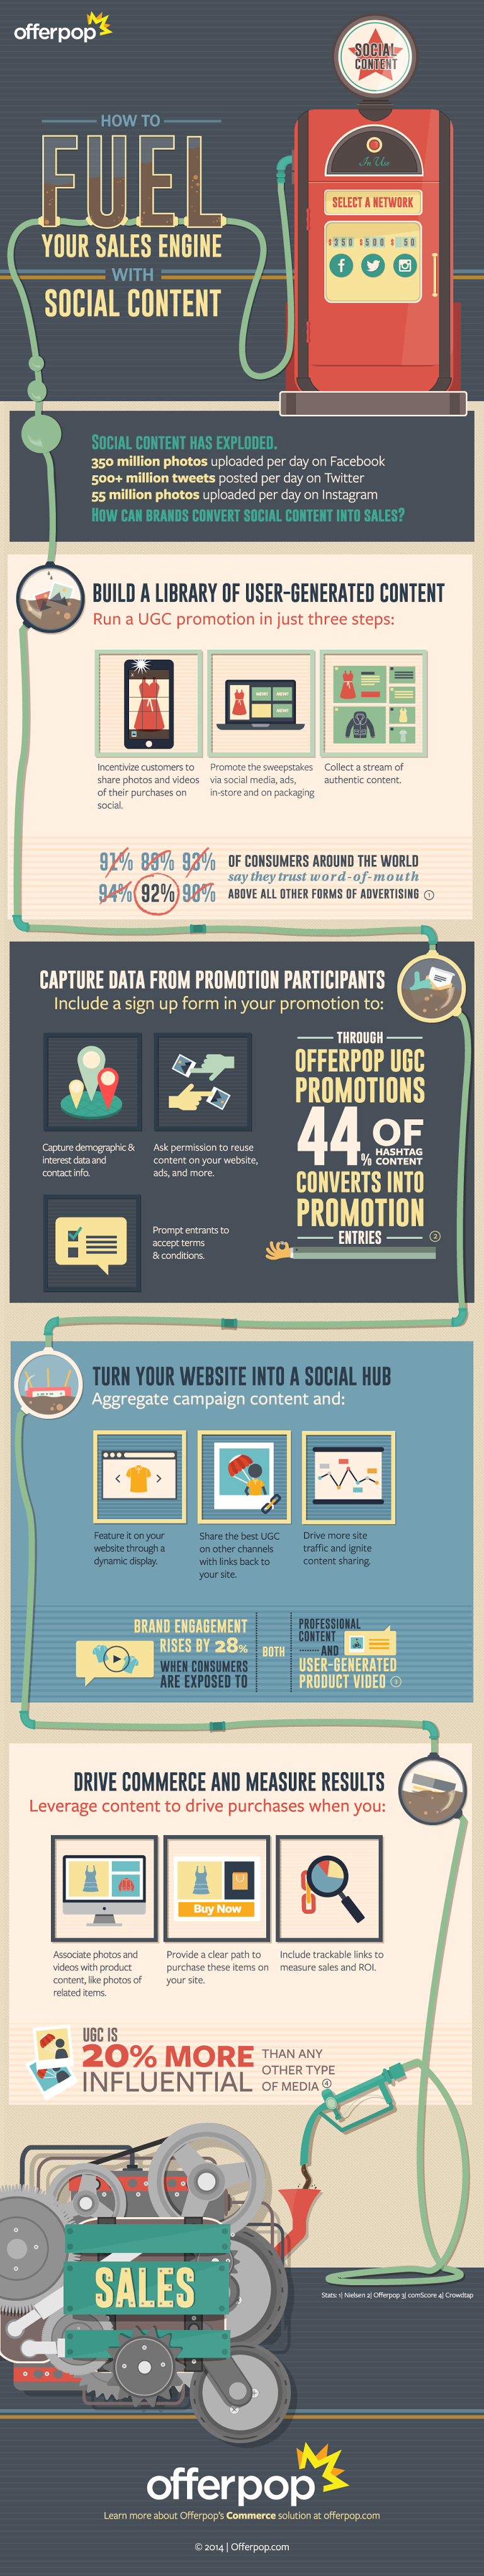 The Strategy for Driving Sales from #SocialMedia Content - #infographic #contentmarketing